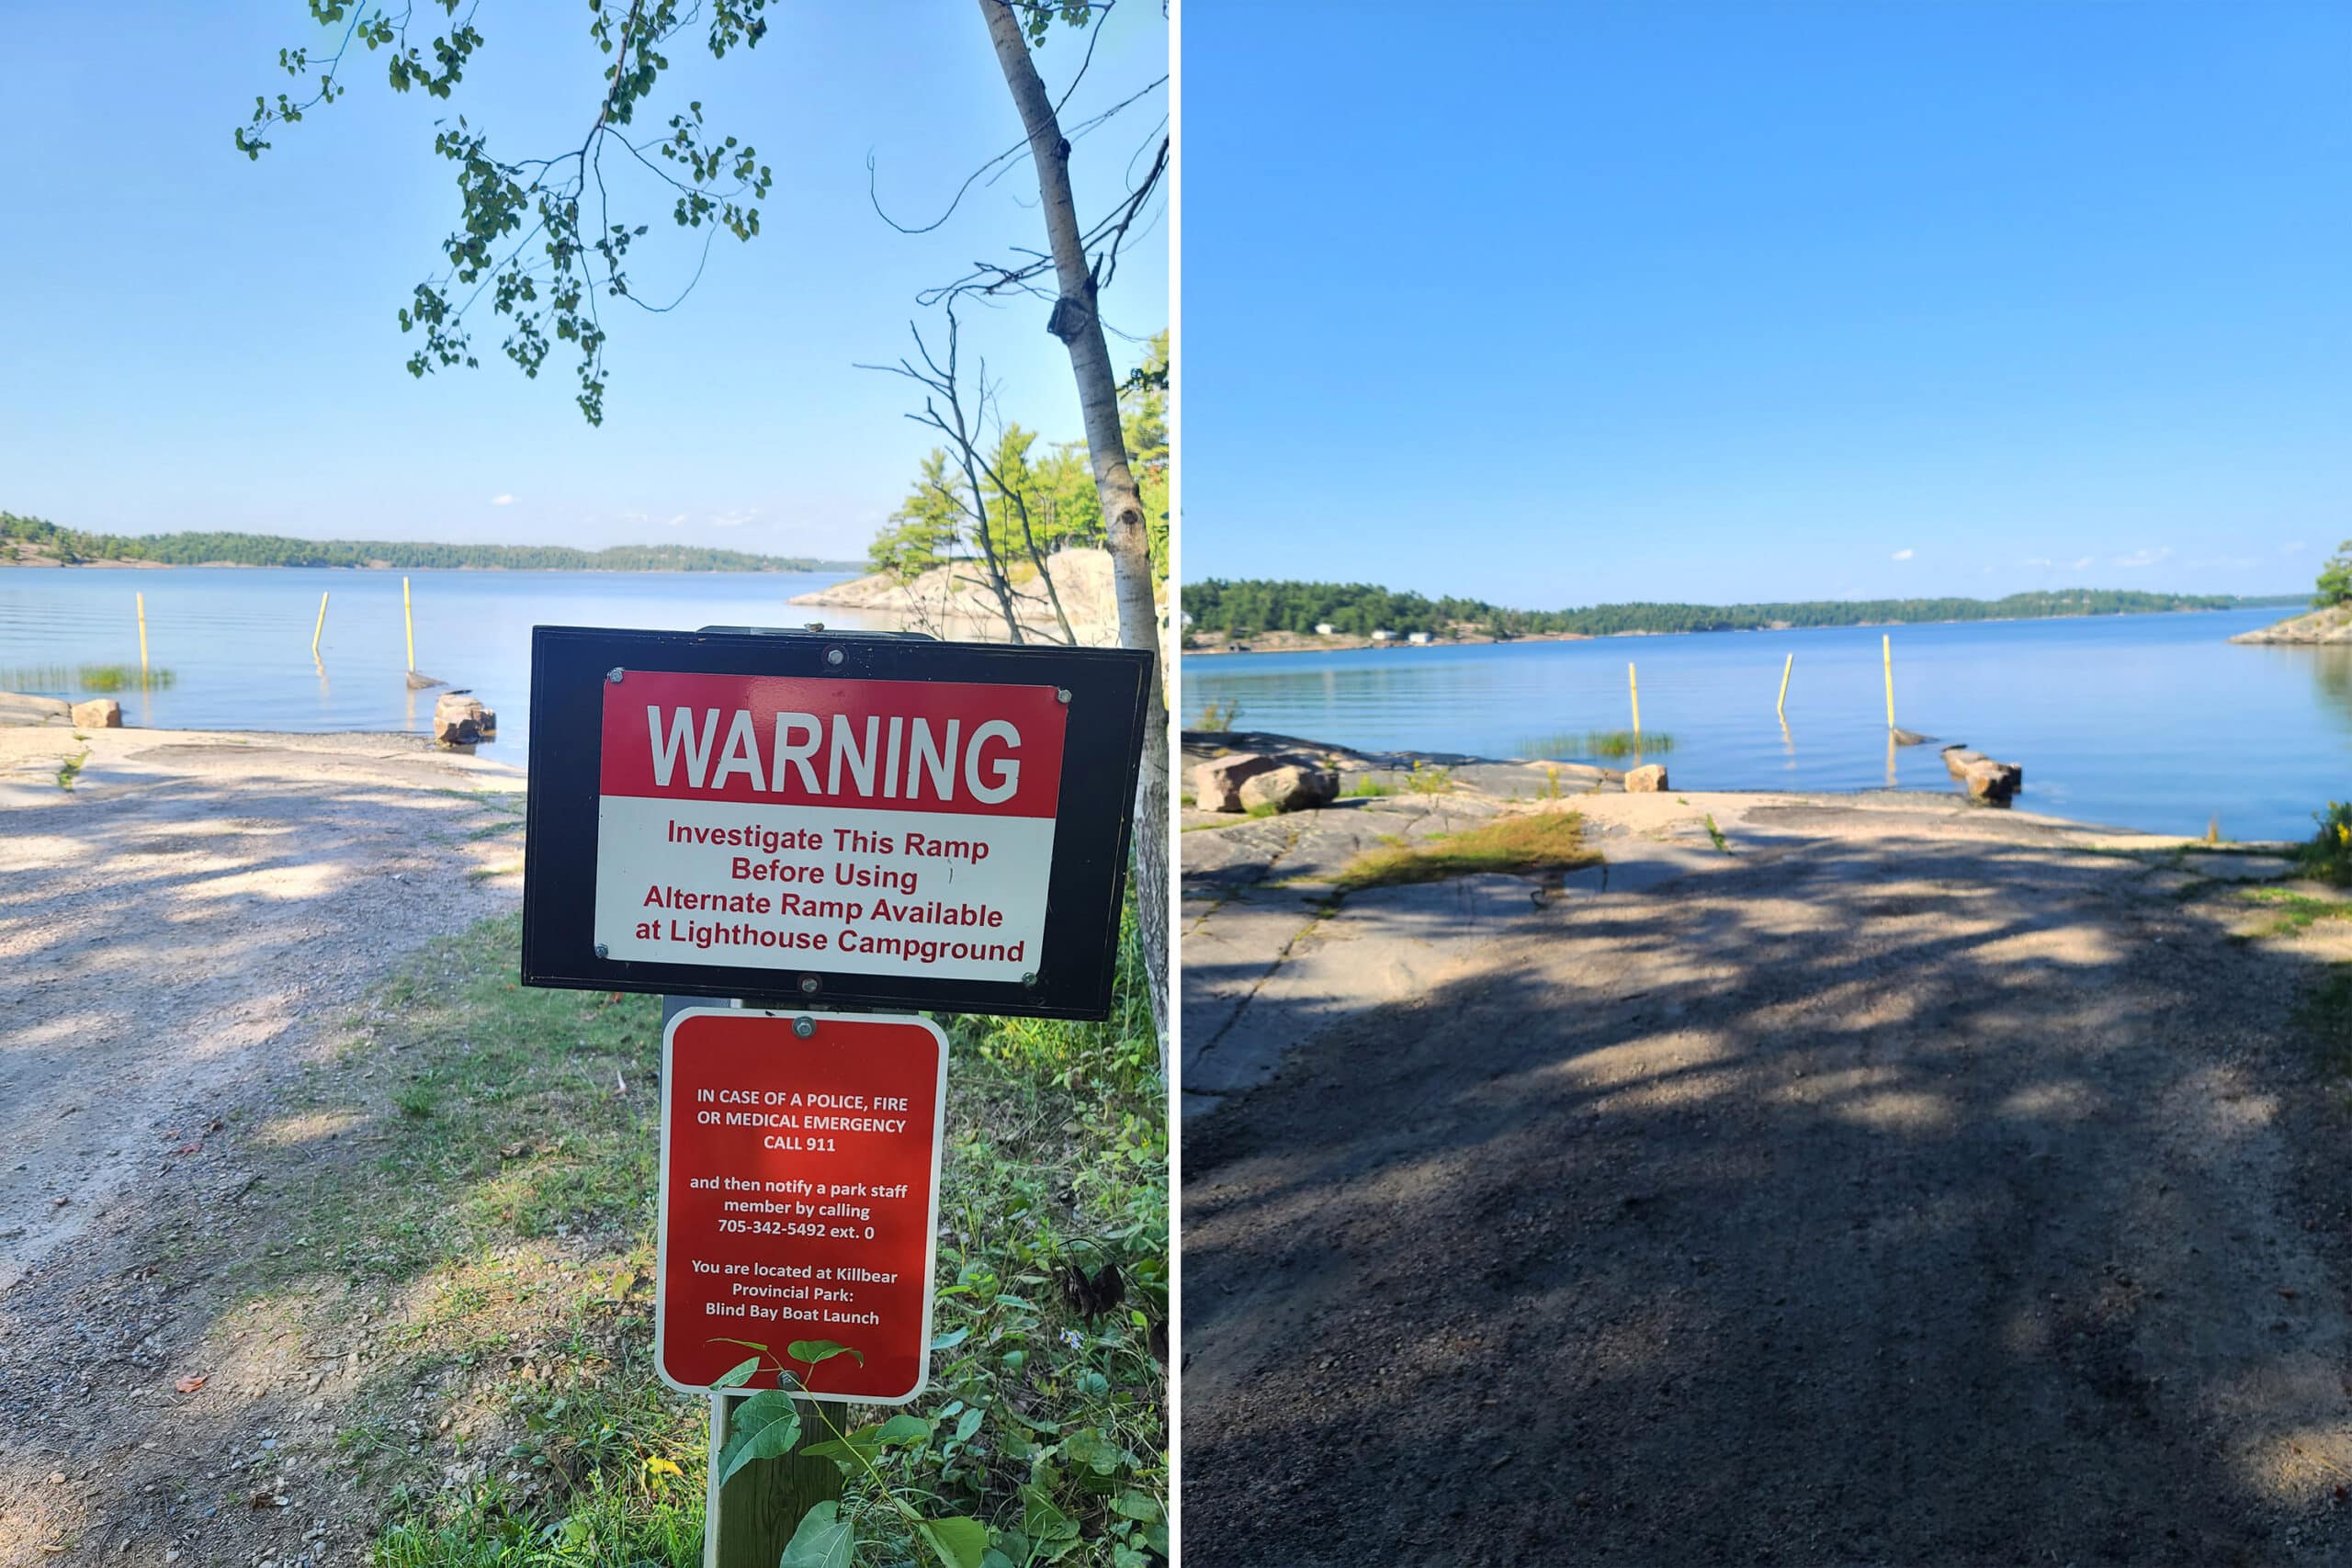 2 part image of a forlorn boat launch, with a sign warning people to investigate the launch before using it.